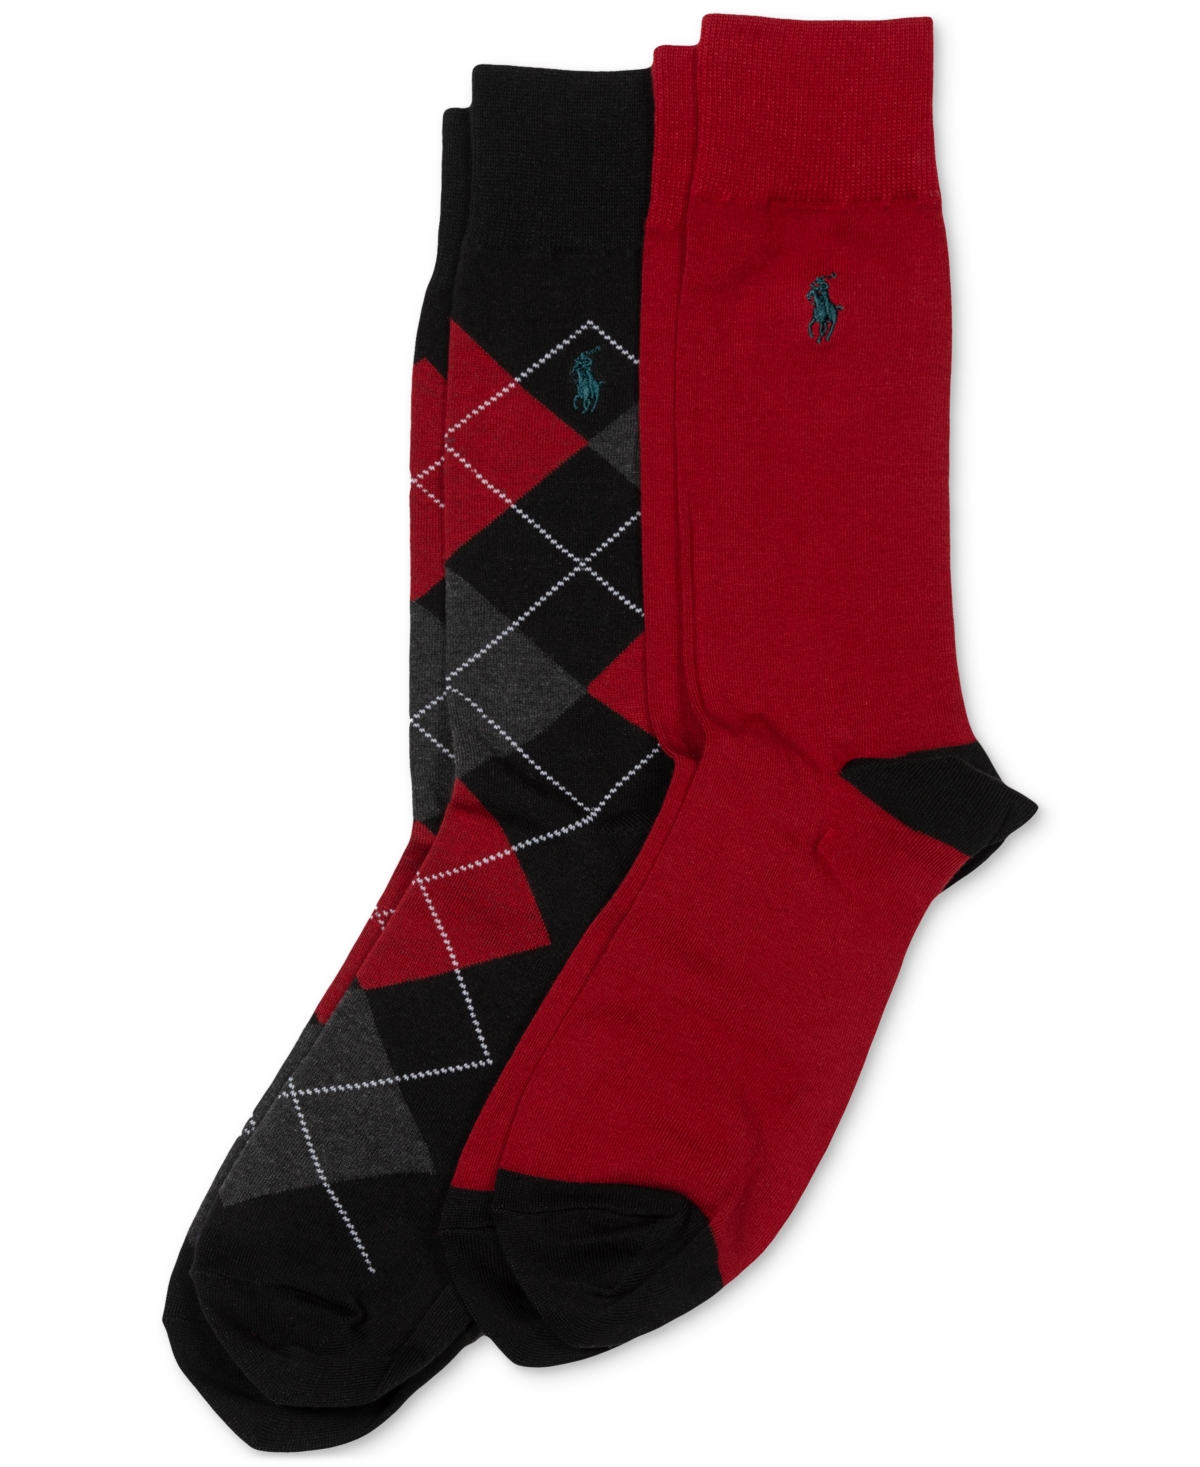 Polo Ralph Lauren Argyle Crew Sock 2-pack In Red, Men's At Urban Outfitters